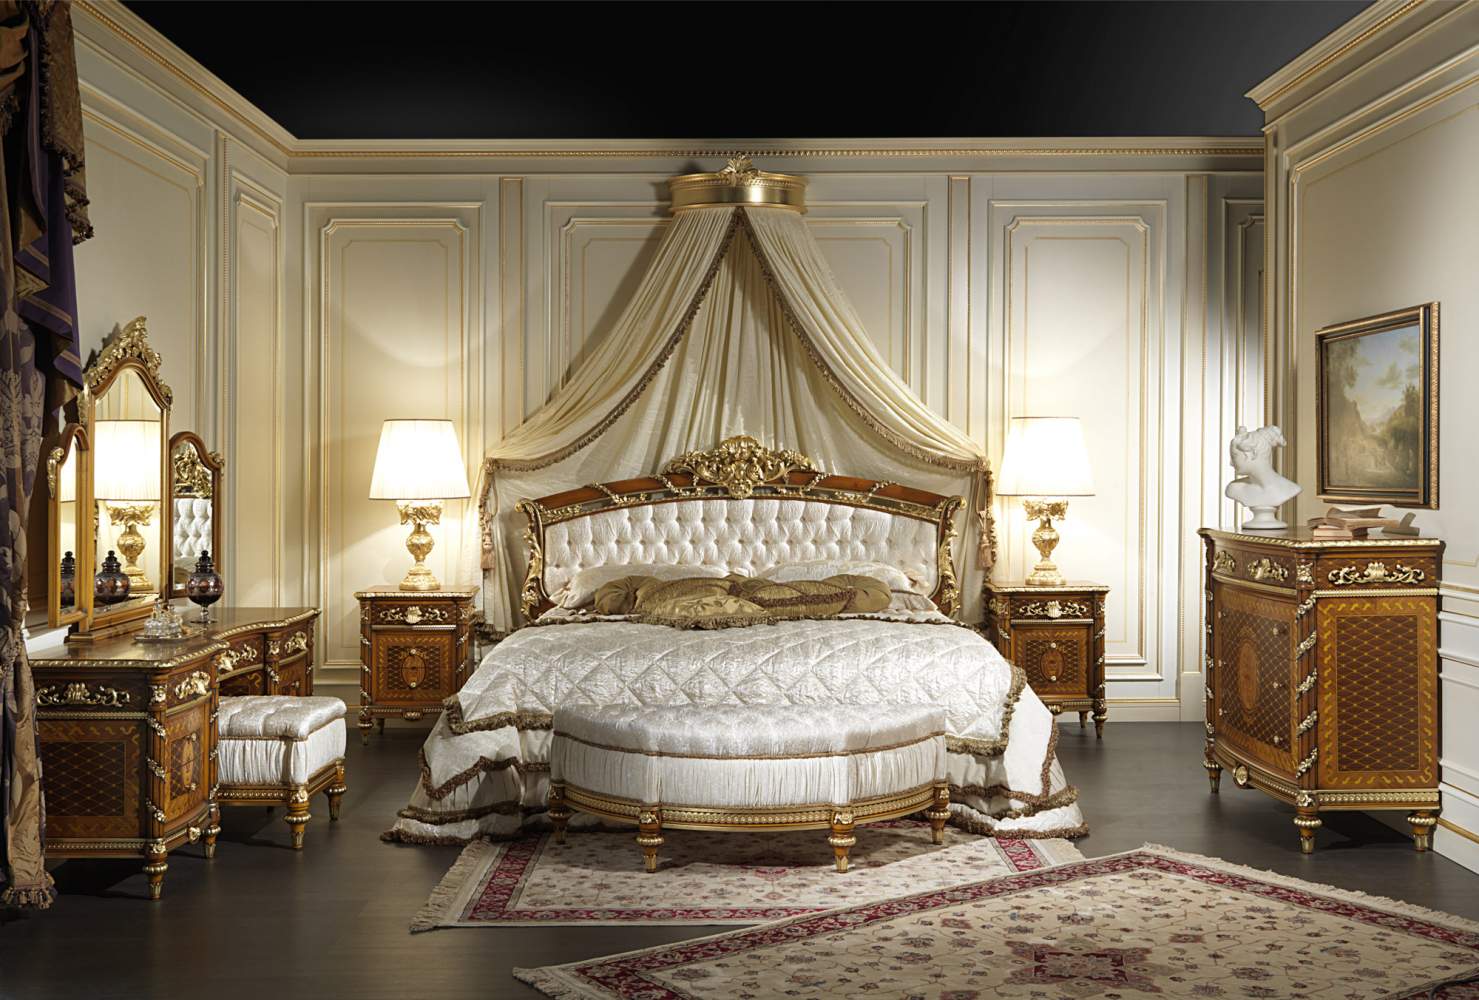 Walnut bedroom furniture Louis XVI Noce e Intarsi with bed, night tables, chest of drawers and toilette in walnut inlaid and carved